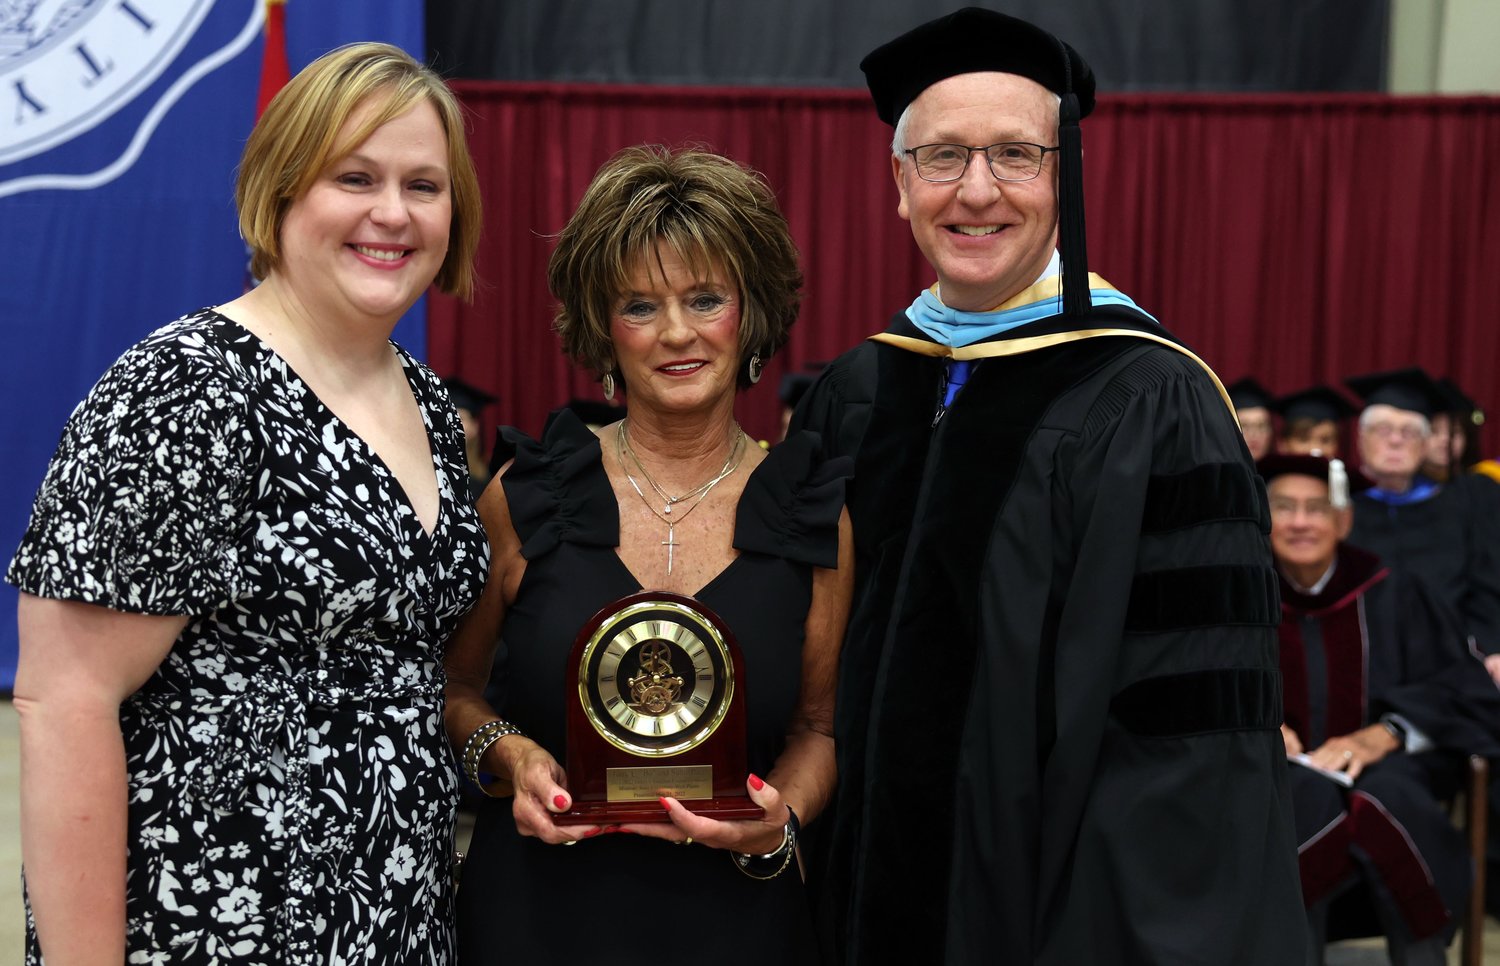 WEST PLAINS RESIDENT Sunie Pace, center, received the Granvil Vaughan Founder’s Award for 2022 on behalf of herself and her late husband, Terry L. “Bo” Pace, during Saturday’s Missouri State University-West Plains (MSU-WP) commencement ceremony at the West Plains Civic Center. With her are her daughter Suzannah, left, and MSU-WP Chancellor Dennis Lancaster, who presented the award.